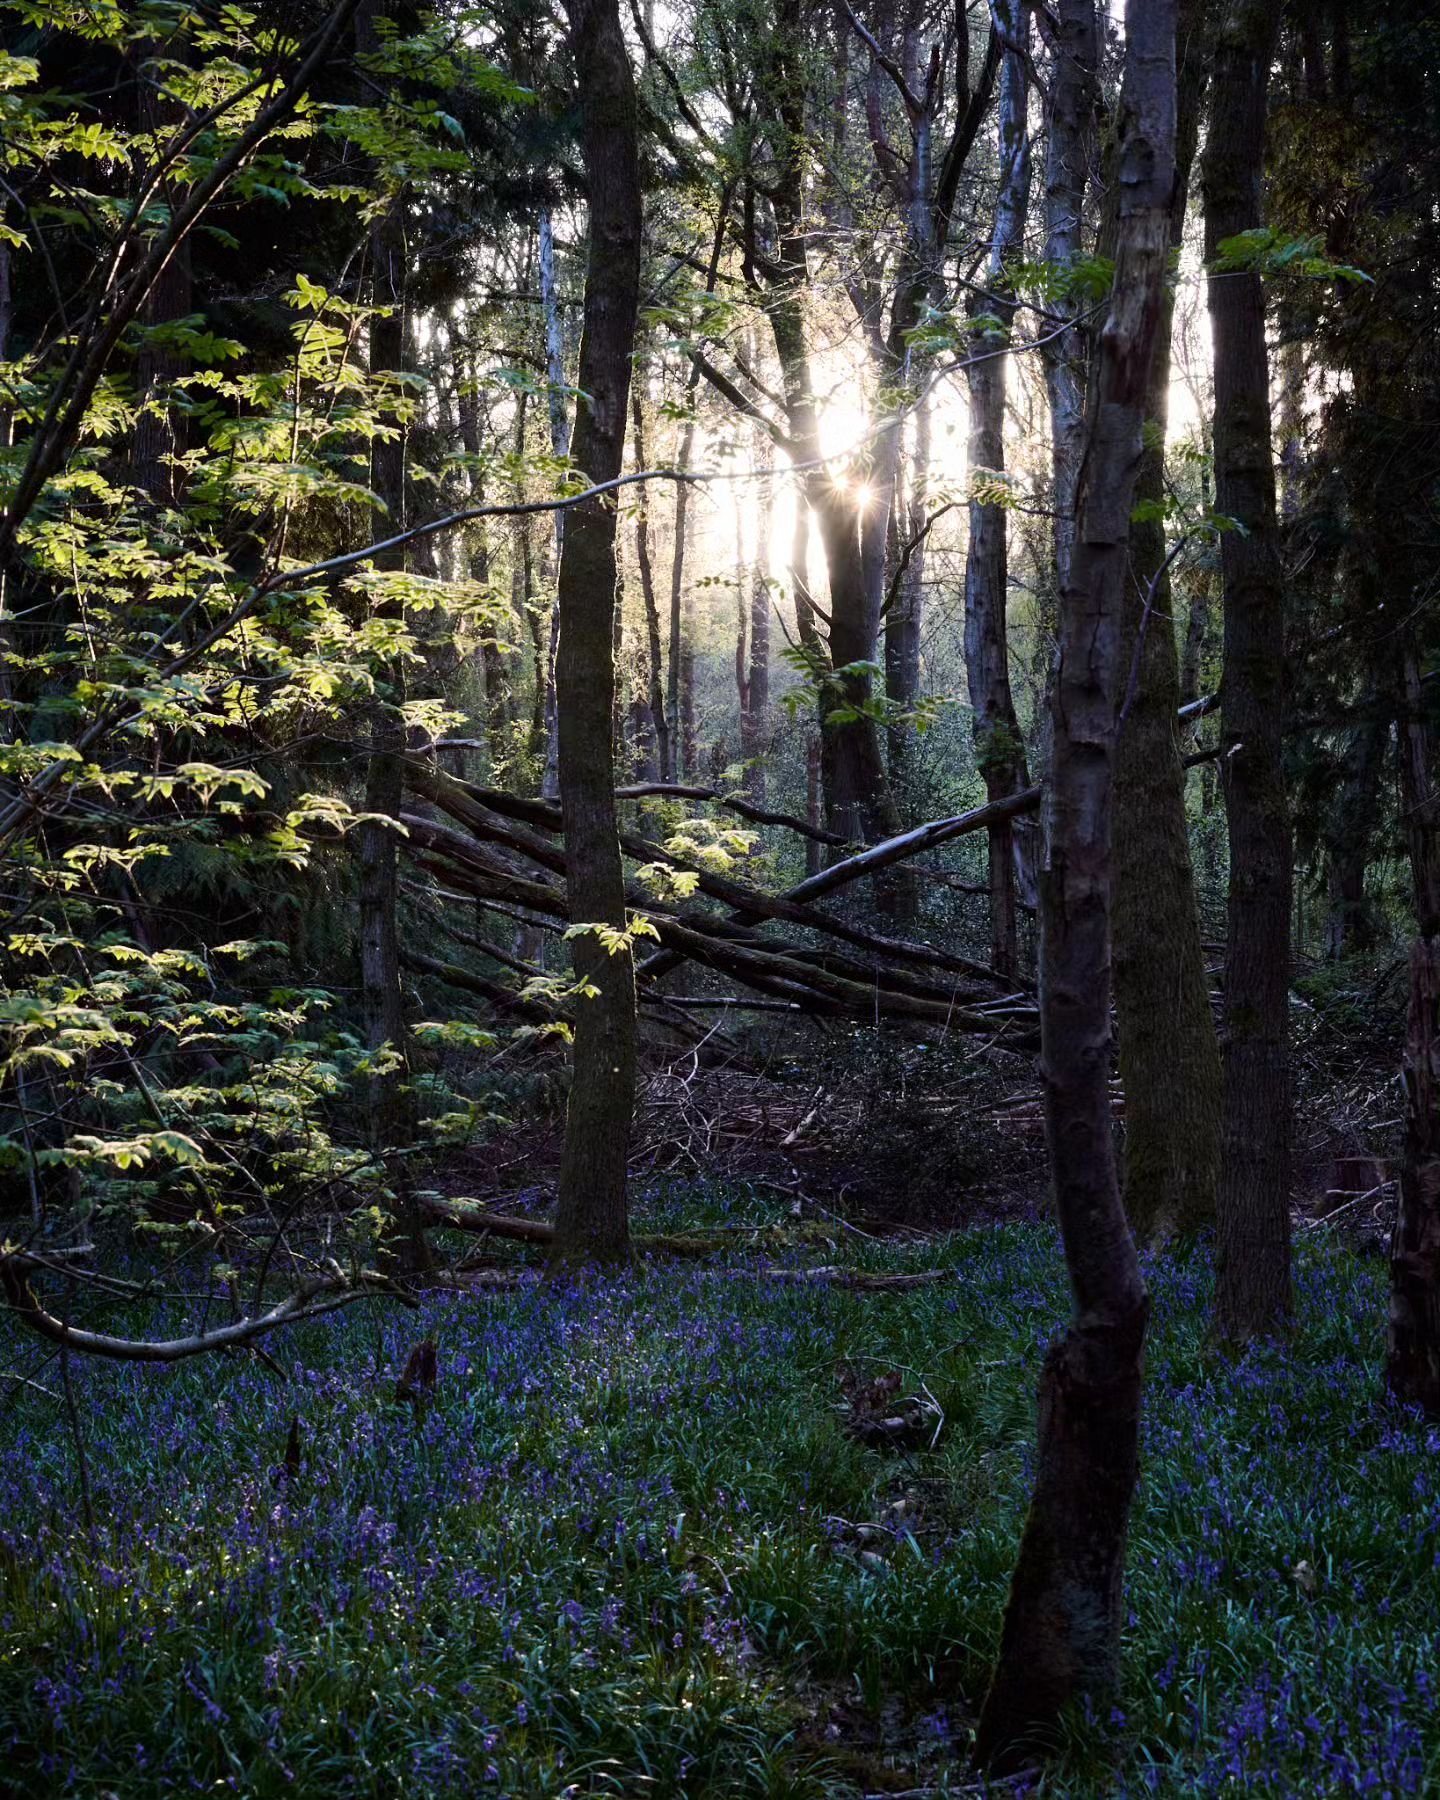 Another from this year.

#tree_lovers #tree_perfection #allkindsoftrees #fairyforest #bluebells #tree_captures #hugs_for_trees #instaflowers #flowersofinstagram #moody_captures #ethereal_moods #tree_magic #Warwickshire #forestphotography #yourbritain